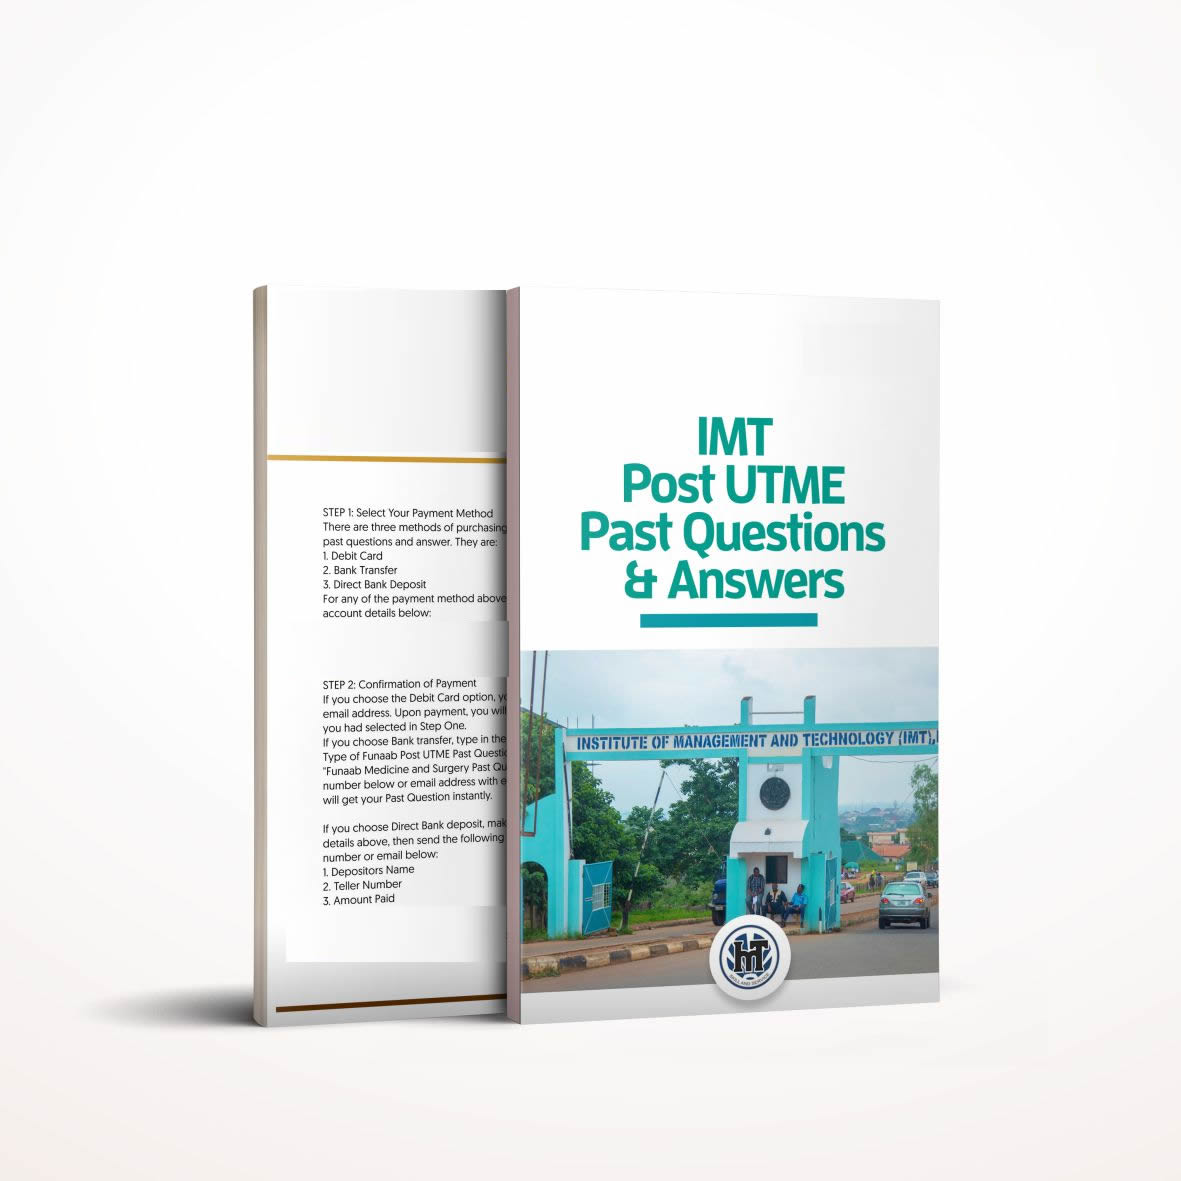 IMT Post UTME past questions and answers